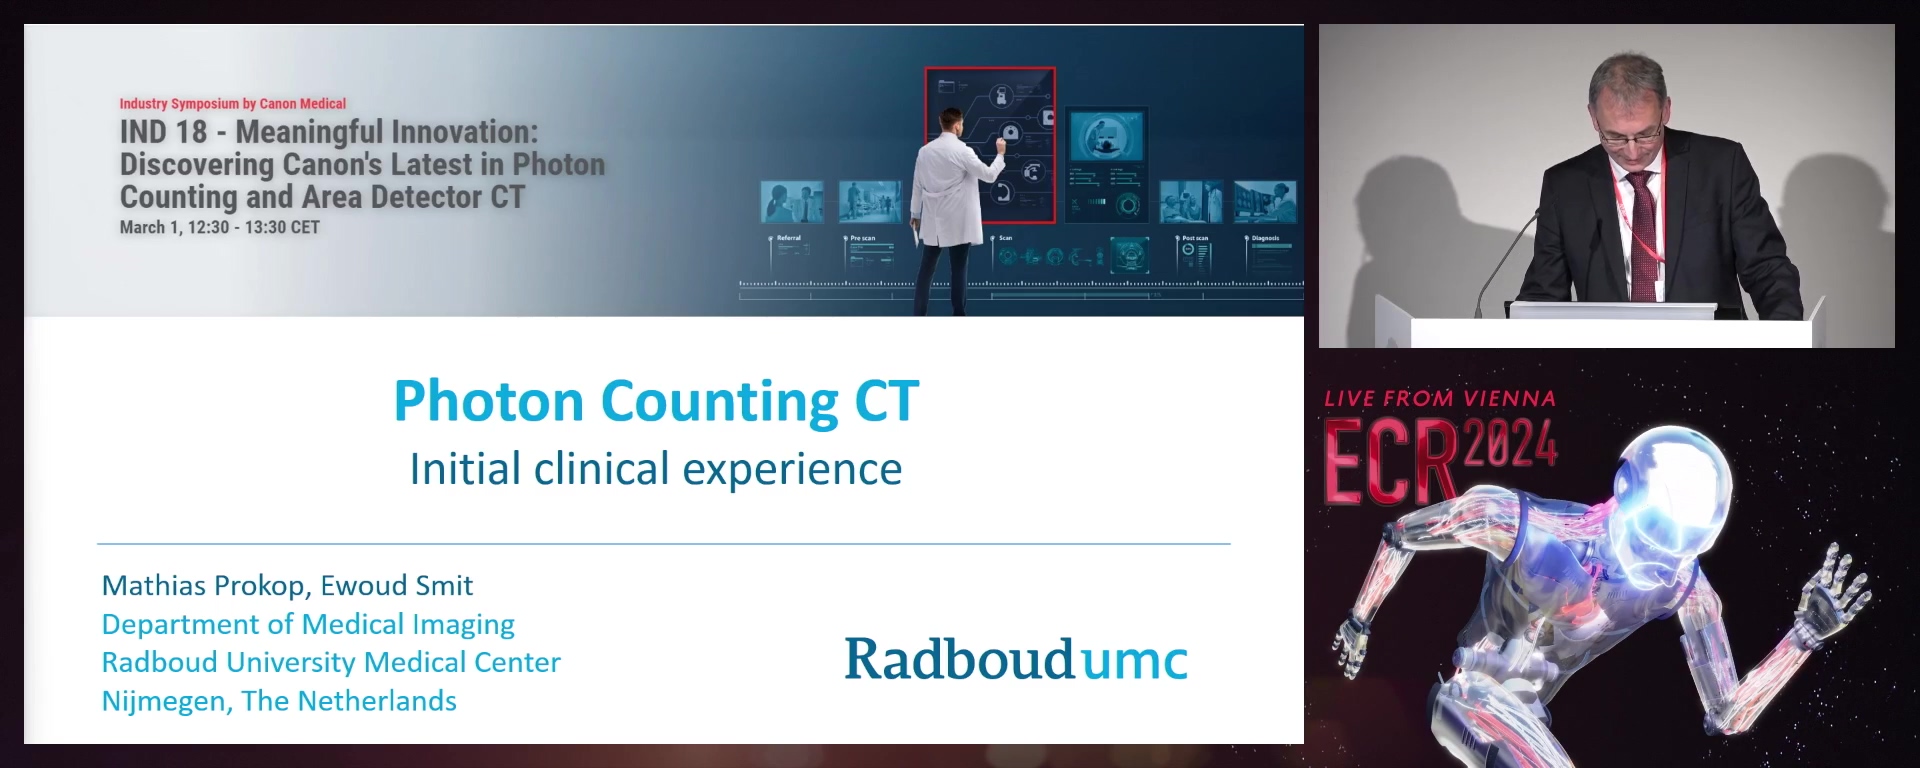 Photon Counting CT: First Clinical Experience